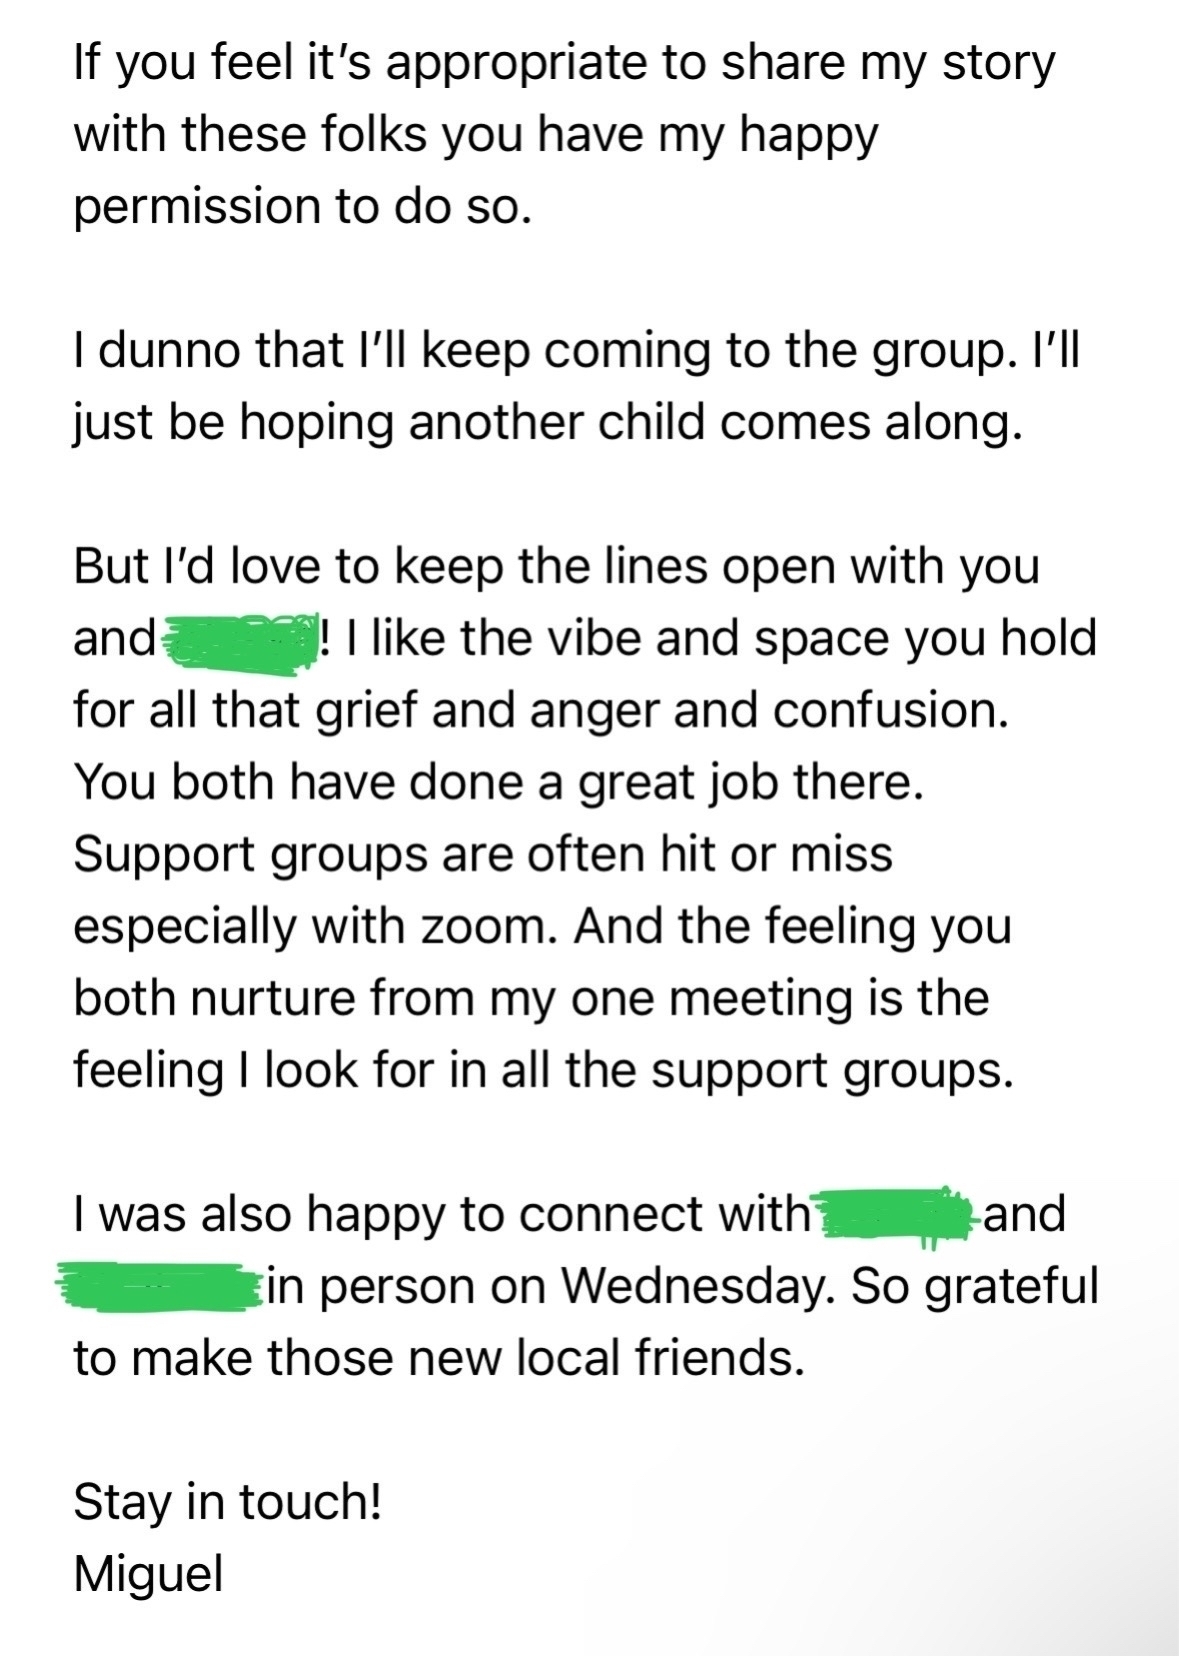 If you feel it's appropriate to share my story with these folks you have my happy permission to do so.&10;I dunno that I'll keep coming to the group. I'll just be hoping another child comes along.&10;But I'd love to keep the lines open with you and&10;"! I like the vibe and space you hold&10;for all that grief and anger and confusion.&10;You both have done a great job there.&10;Support groups are often hit or miss especially with zoom. And the feeling you both nurture from my one meeting is the feeling I look for in all the support groups.&10;I was also happy to connect with?&10;and&10;Ein person on Wednesday. So grateful to make those new local friends.&10;Stay in touch!&10;Miguel